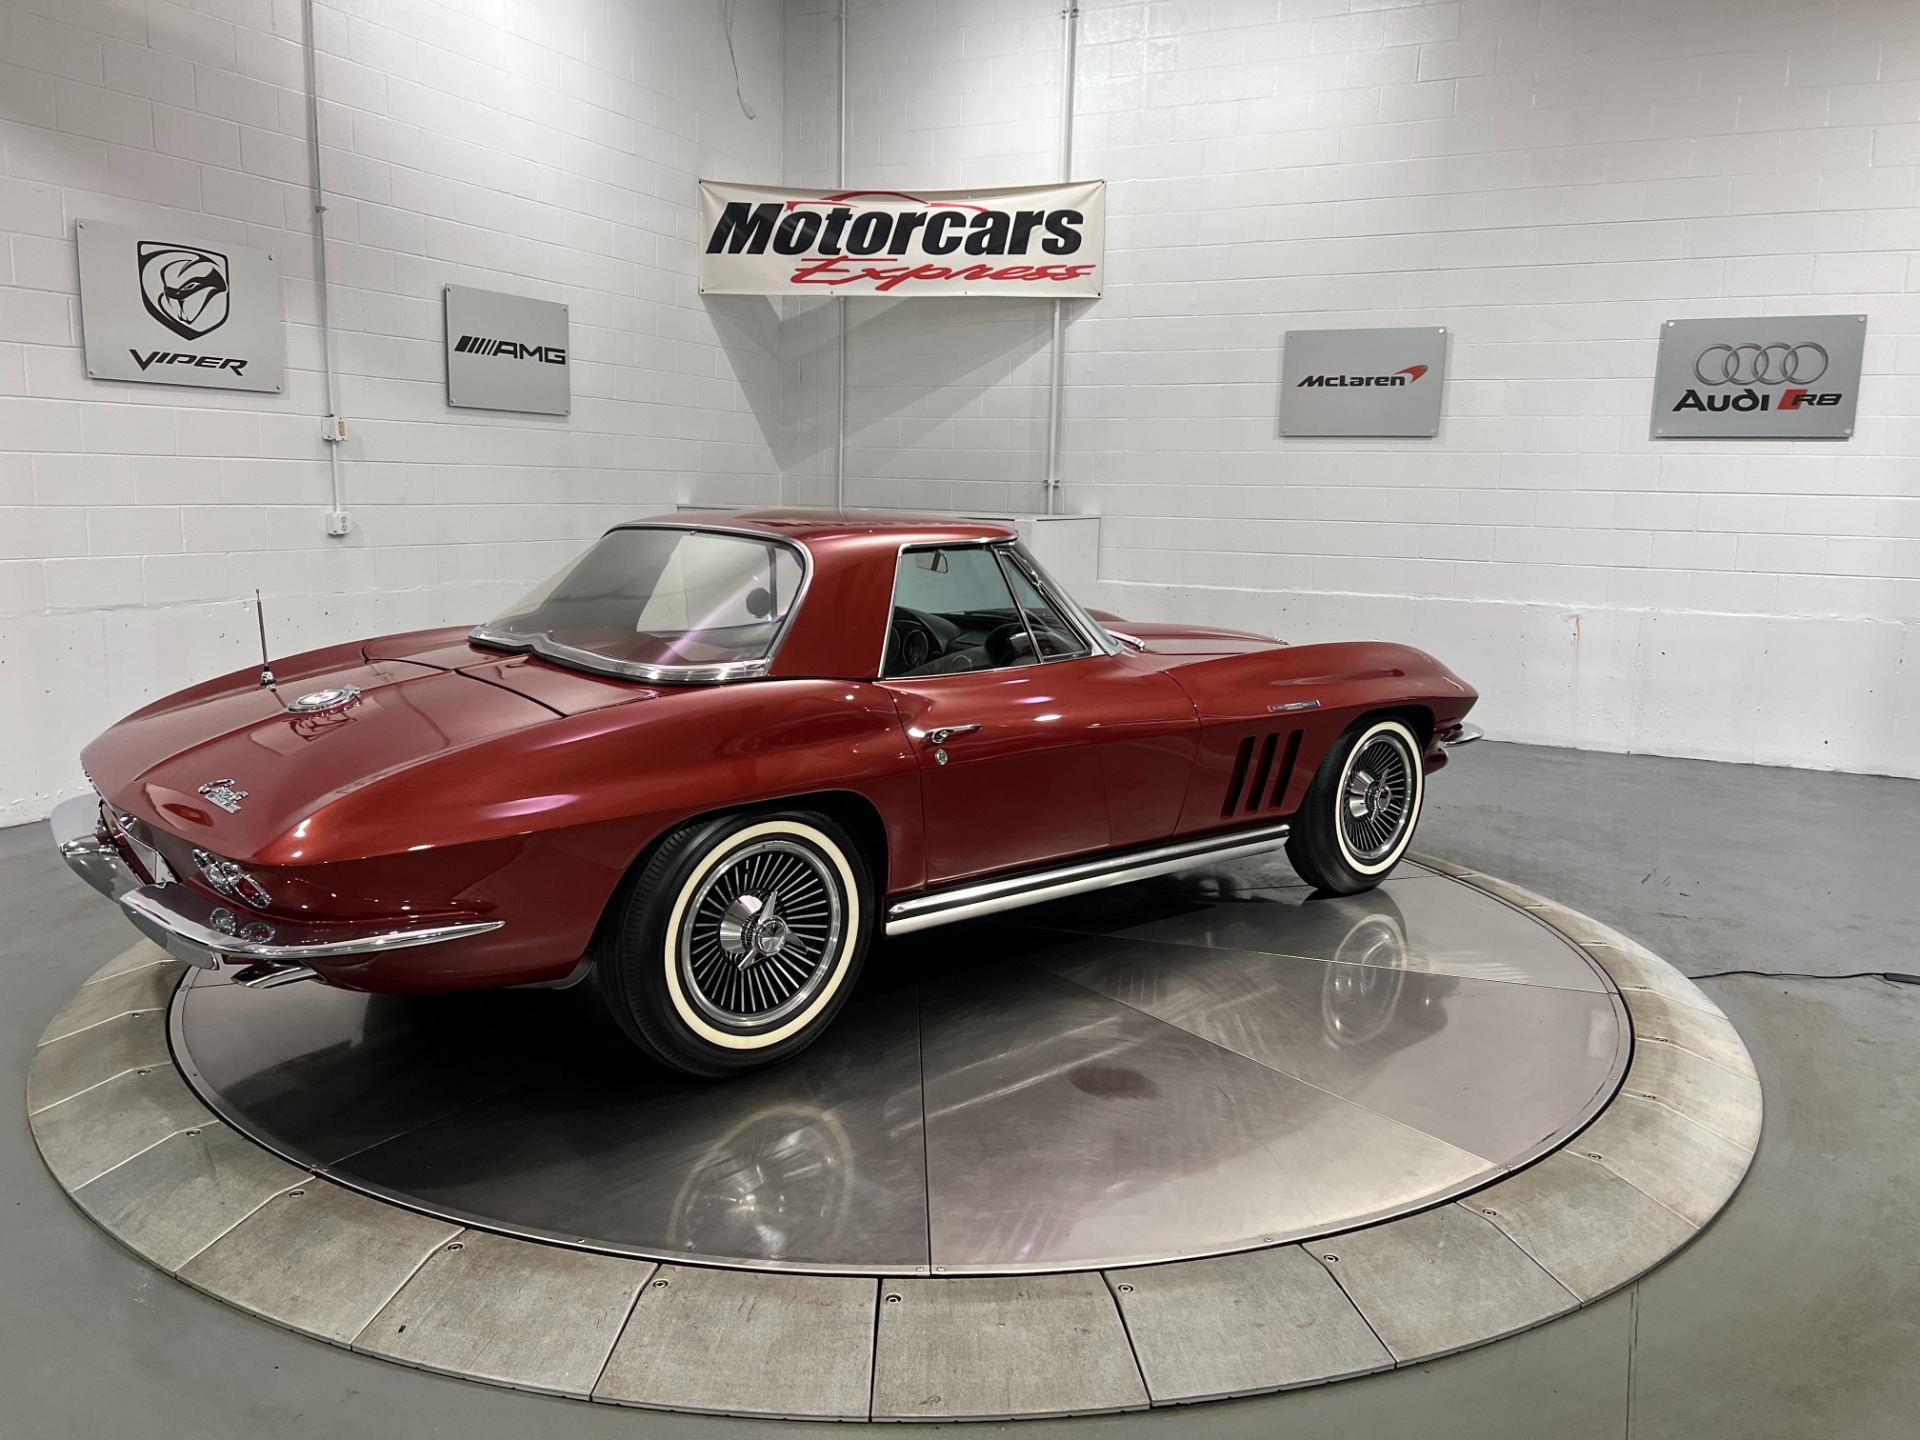 Used-1965-Chevrolet-Corvette-Stingray-Convertible-Fuel-Injected